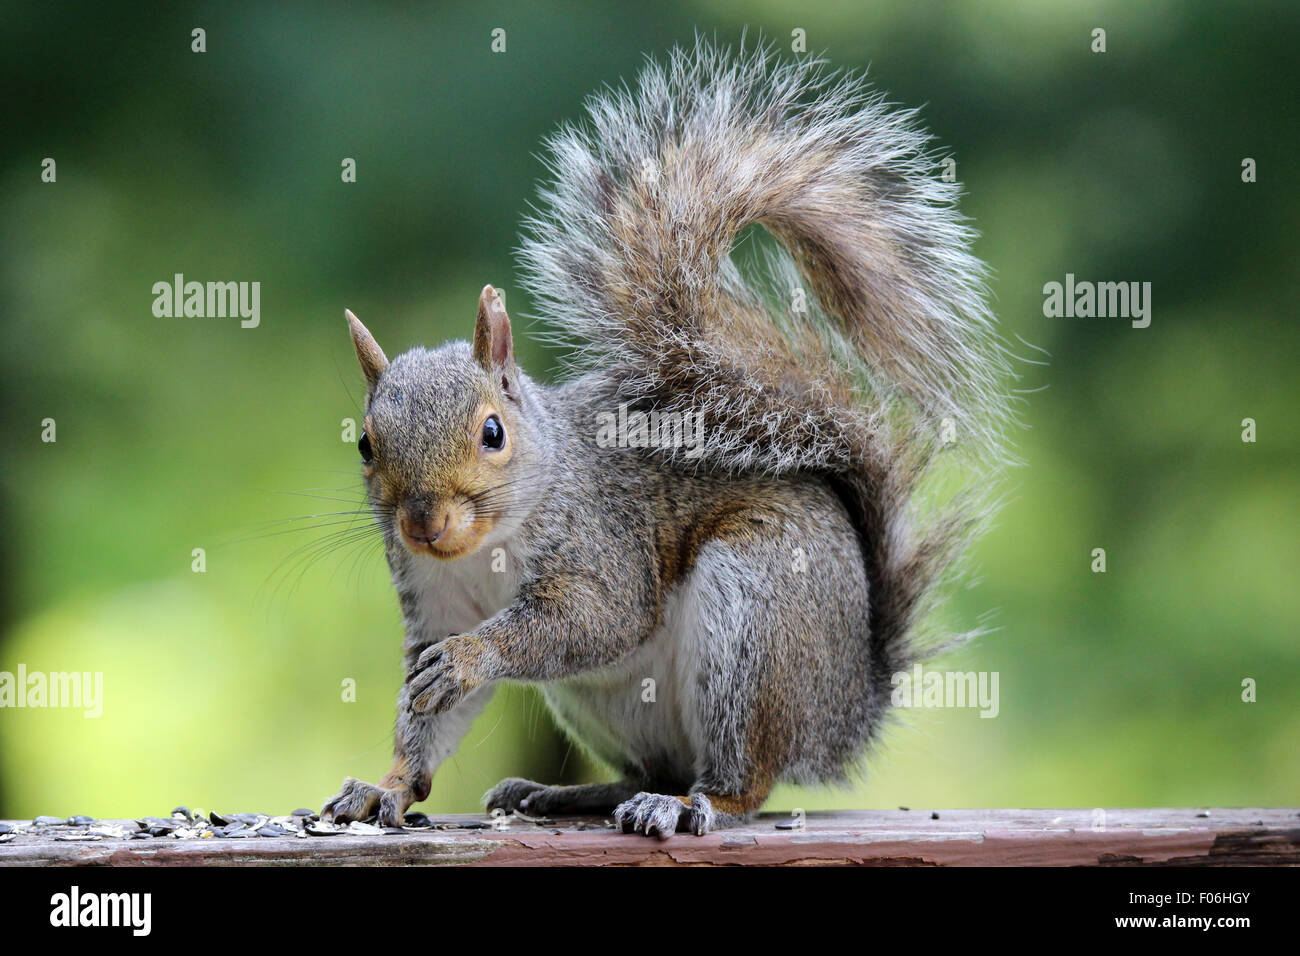 A gray squirrel (Sciurus carolinensis) pauses to look at the camera while eating seeds. Stock Photo